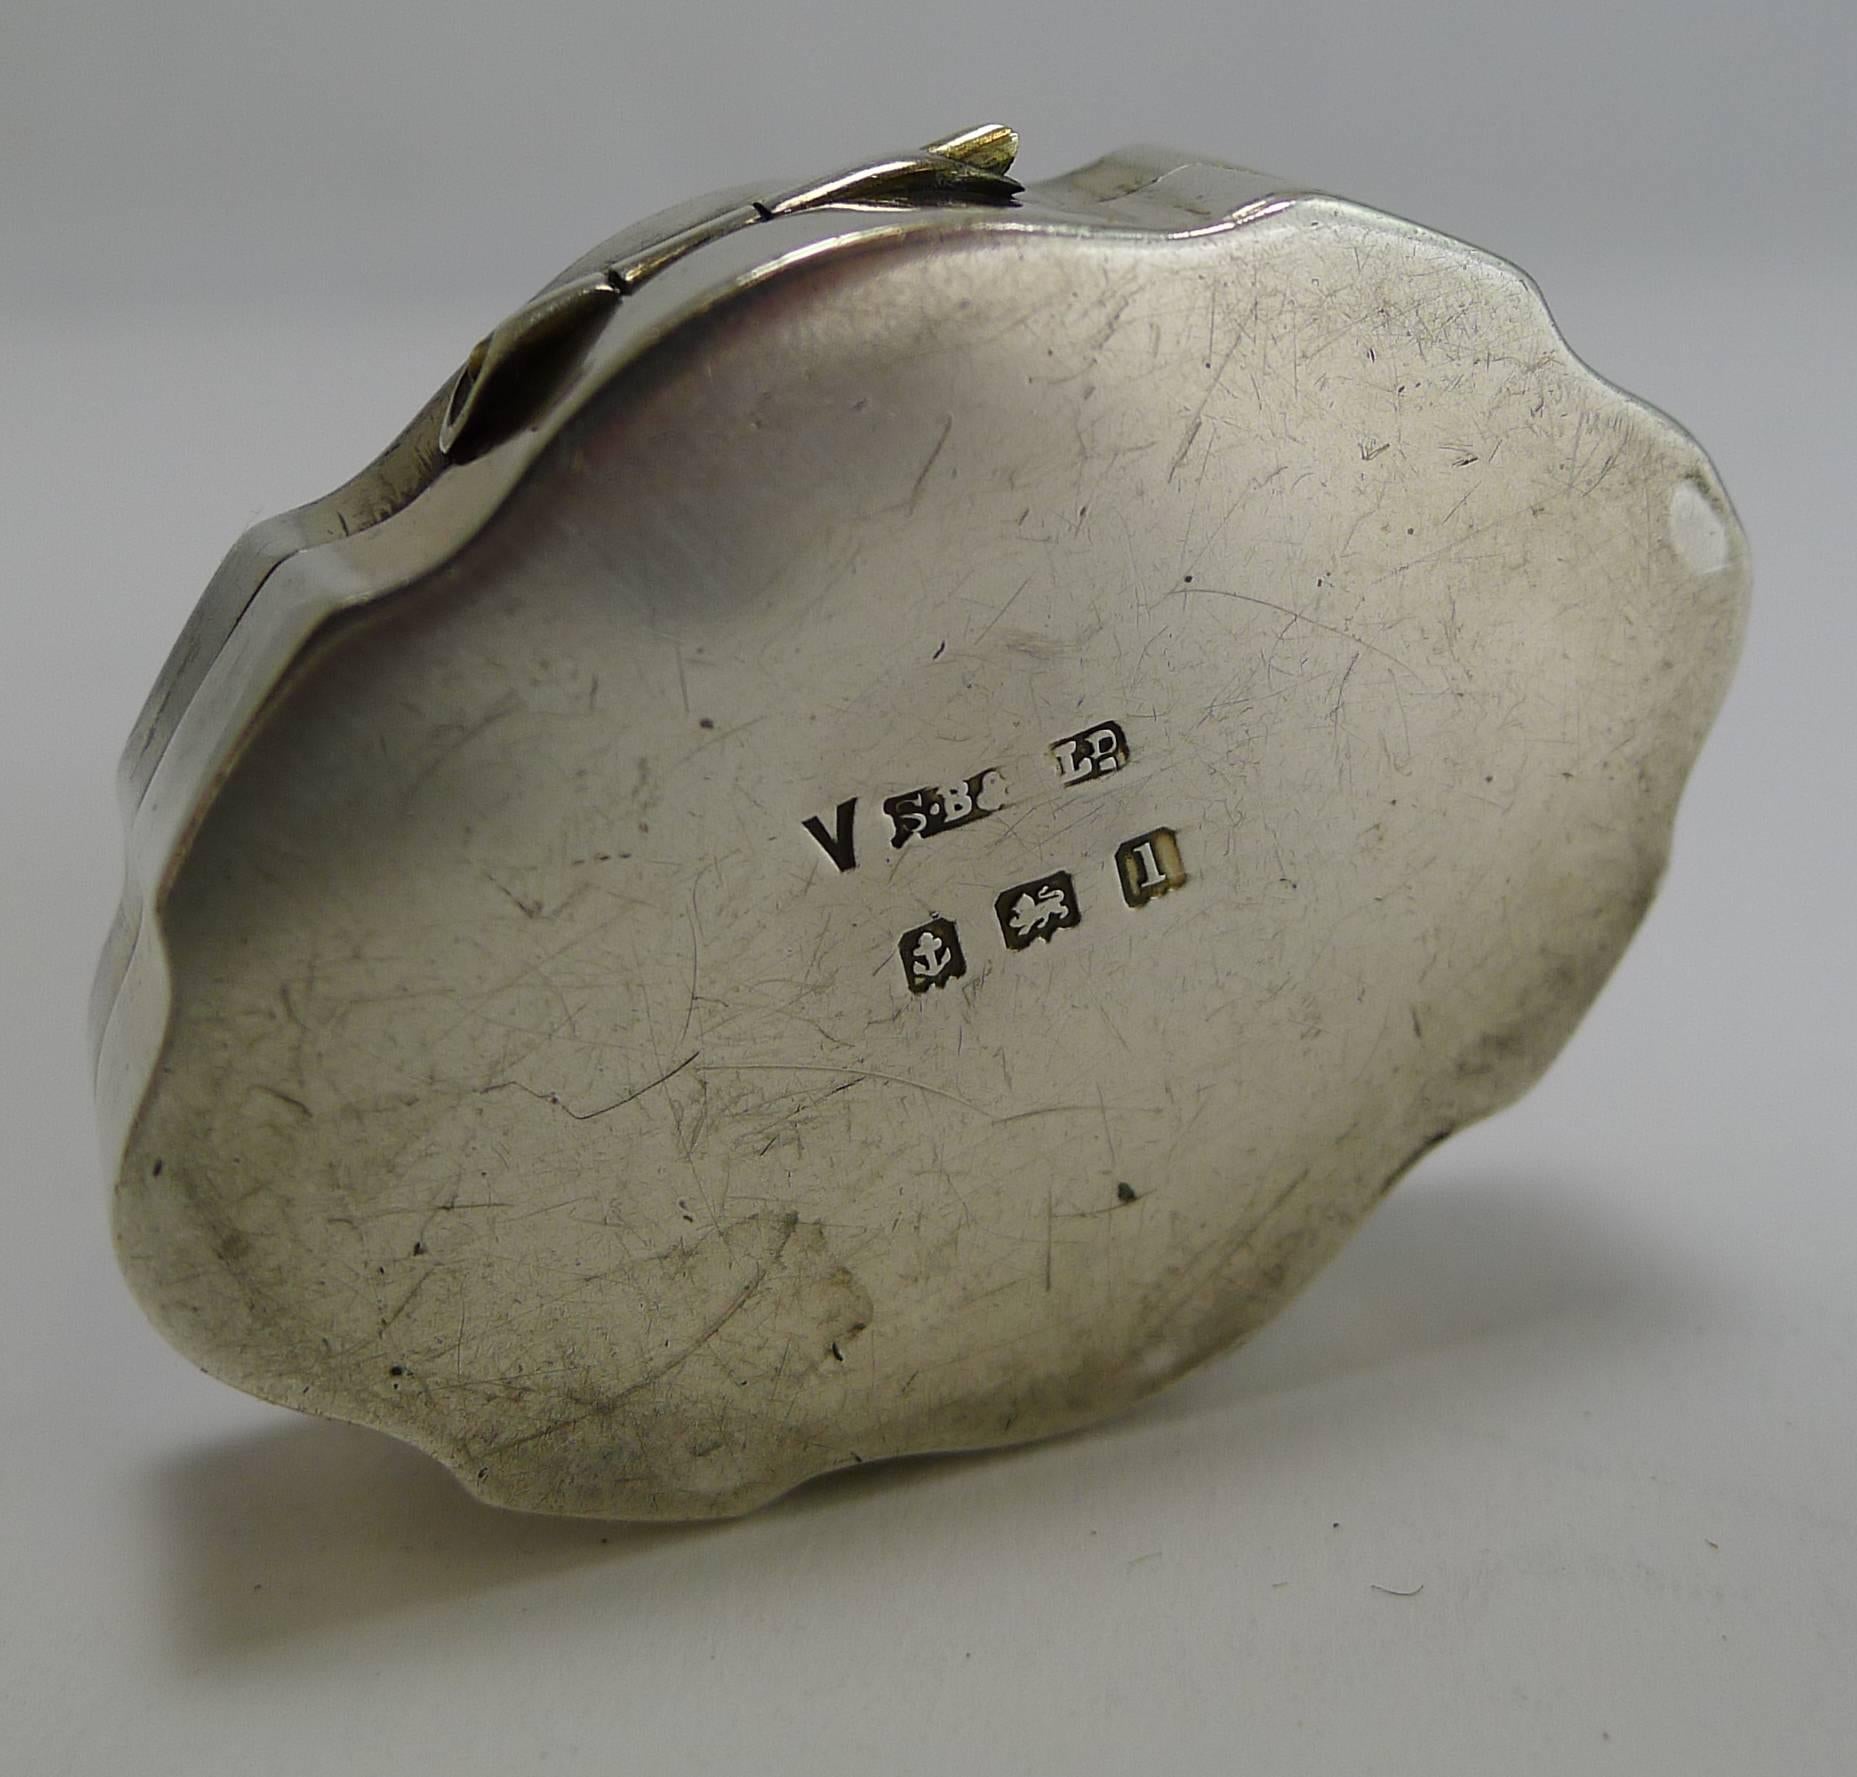 A most unusual and beautifully shaped pill box made from English sterling silver fully hallmarked for Birmingham 1910 together with the makers mark for the silversmith, S. Blanckensee & Son Ltd,

The lid is beautifully decorated with a turquoise